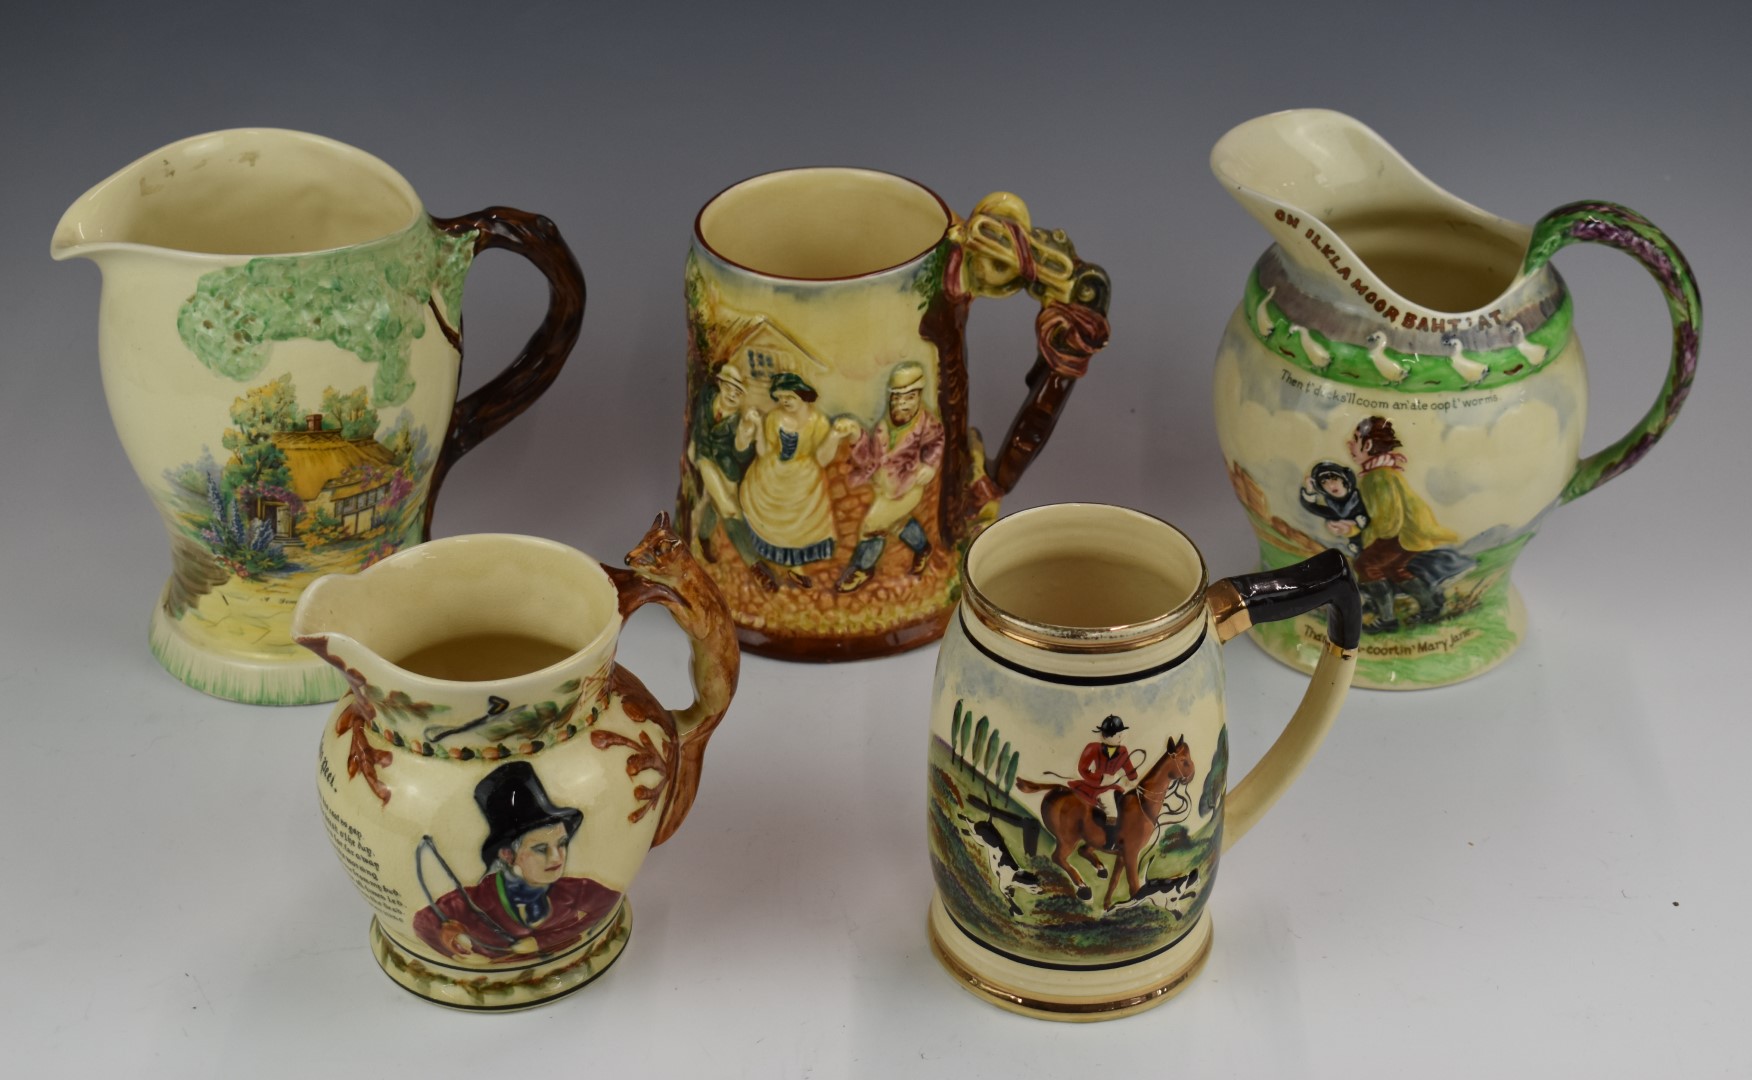 Five musical jugs including Crown Devon, Sylvac and Royal Winton, tallest 19cm